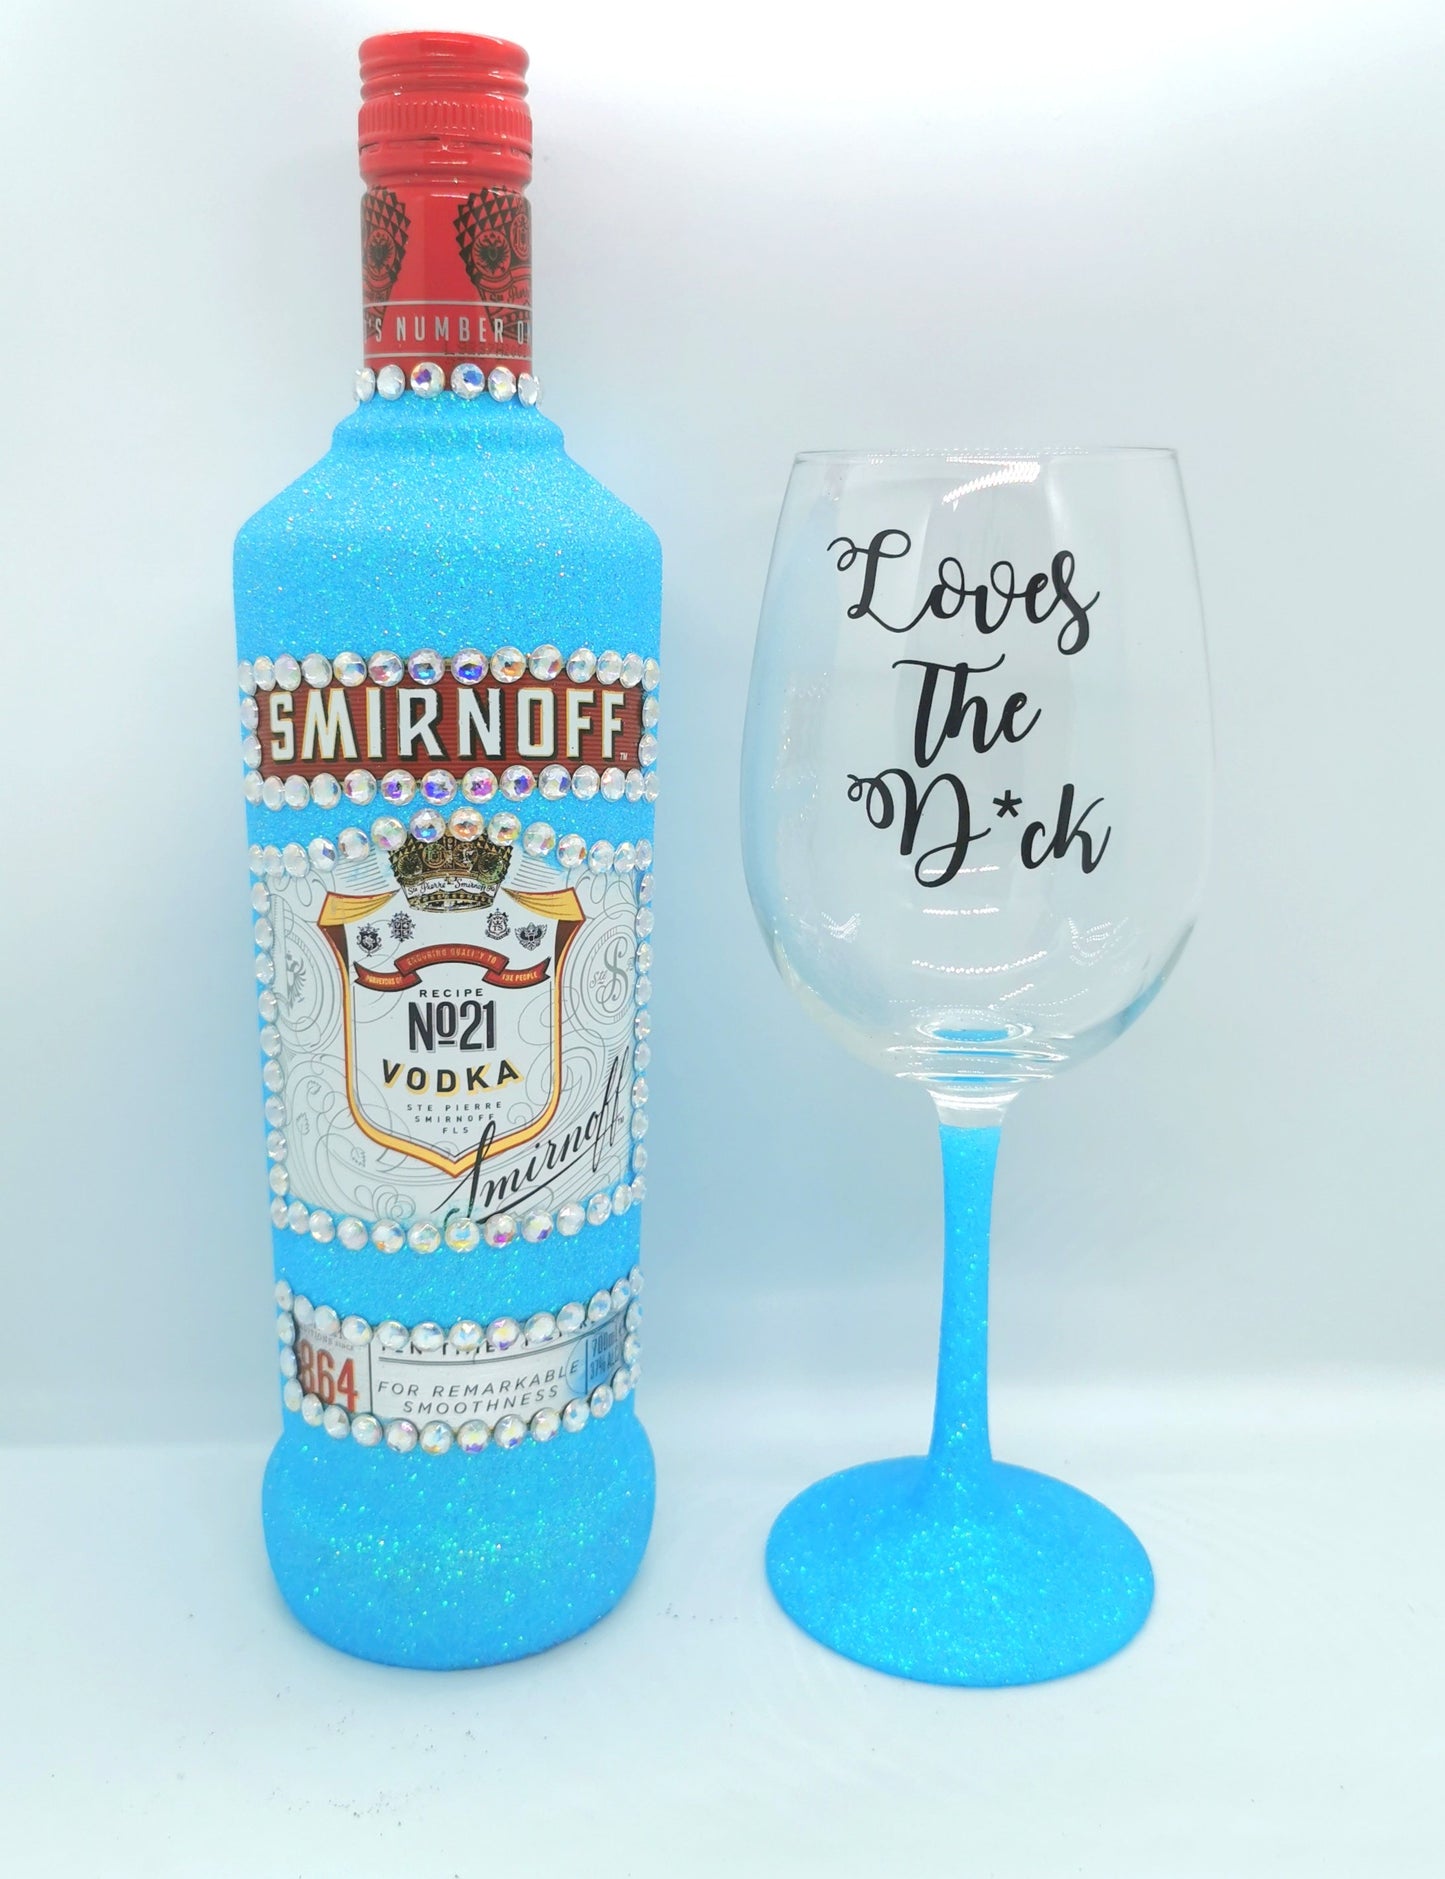 Smirnoff and loves the d*ck glass